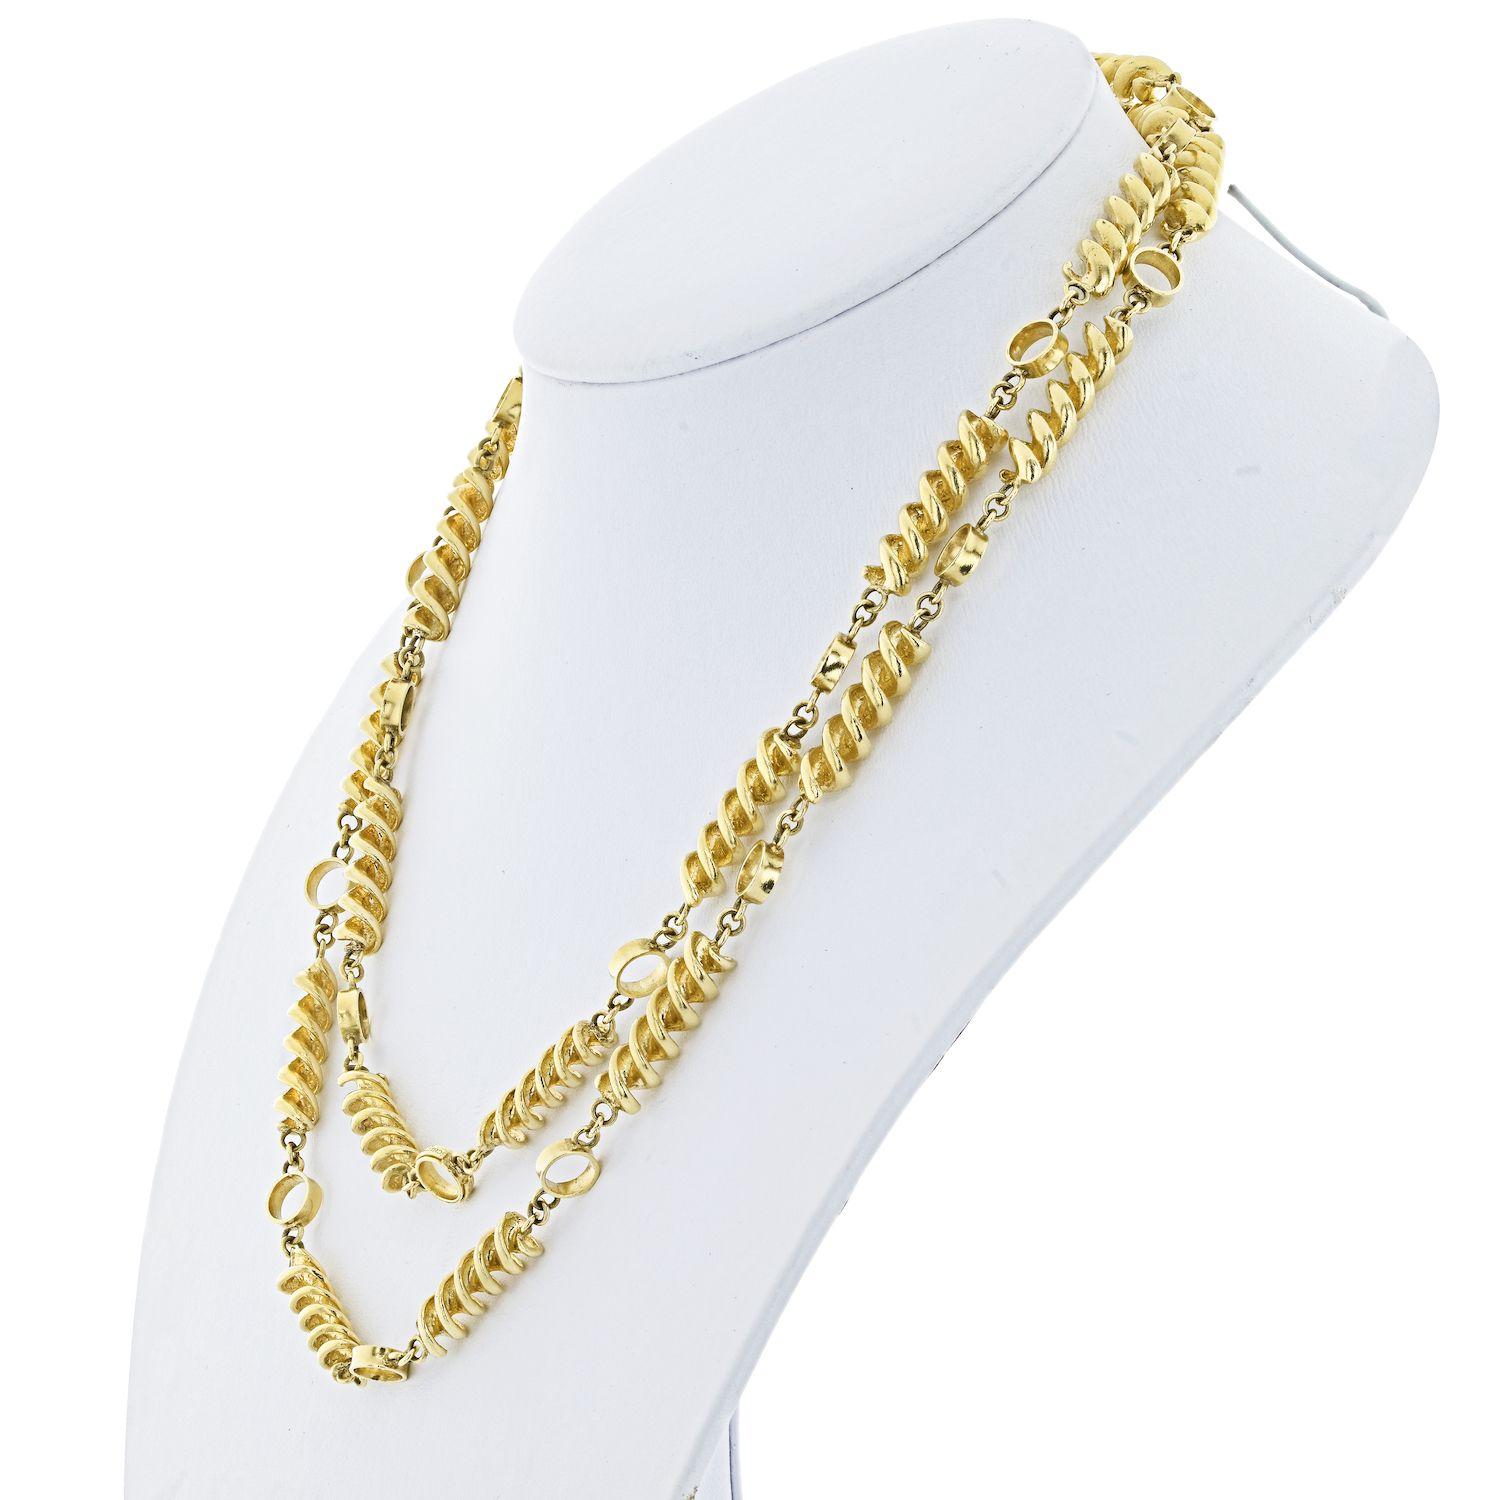 Achieve an instantly polished look with this vintage yellow gold chain! Tiffany & Co. chain by Schlumberger is composed as a stylized 38 inch long chic accessory. 